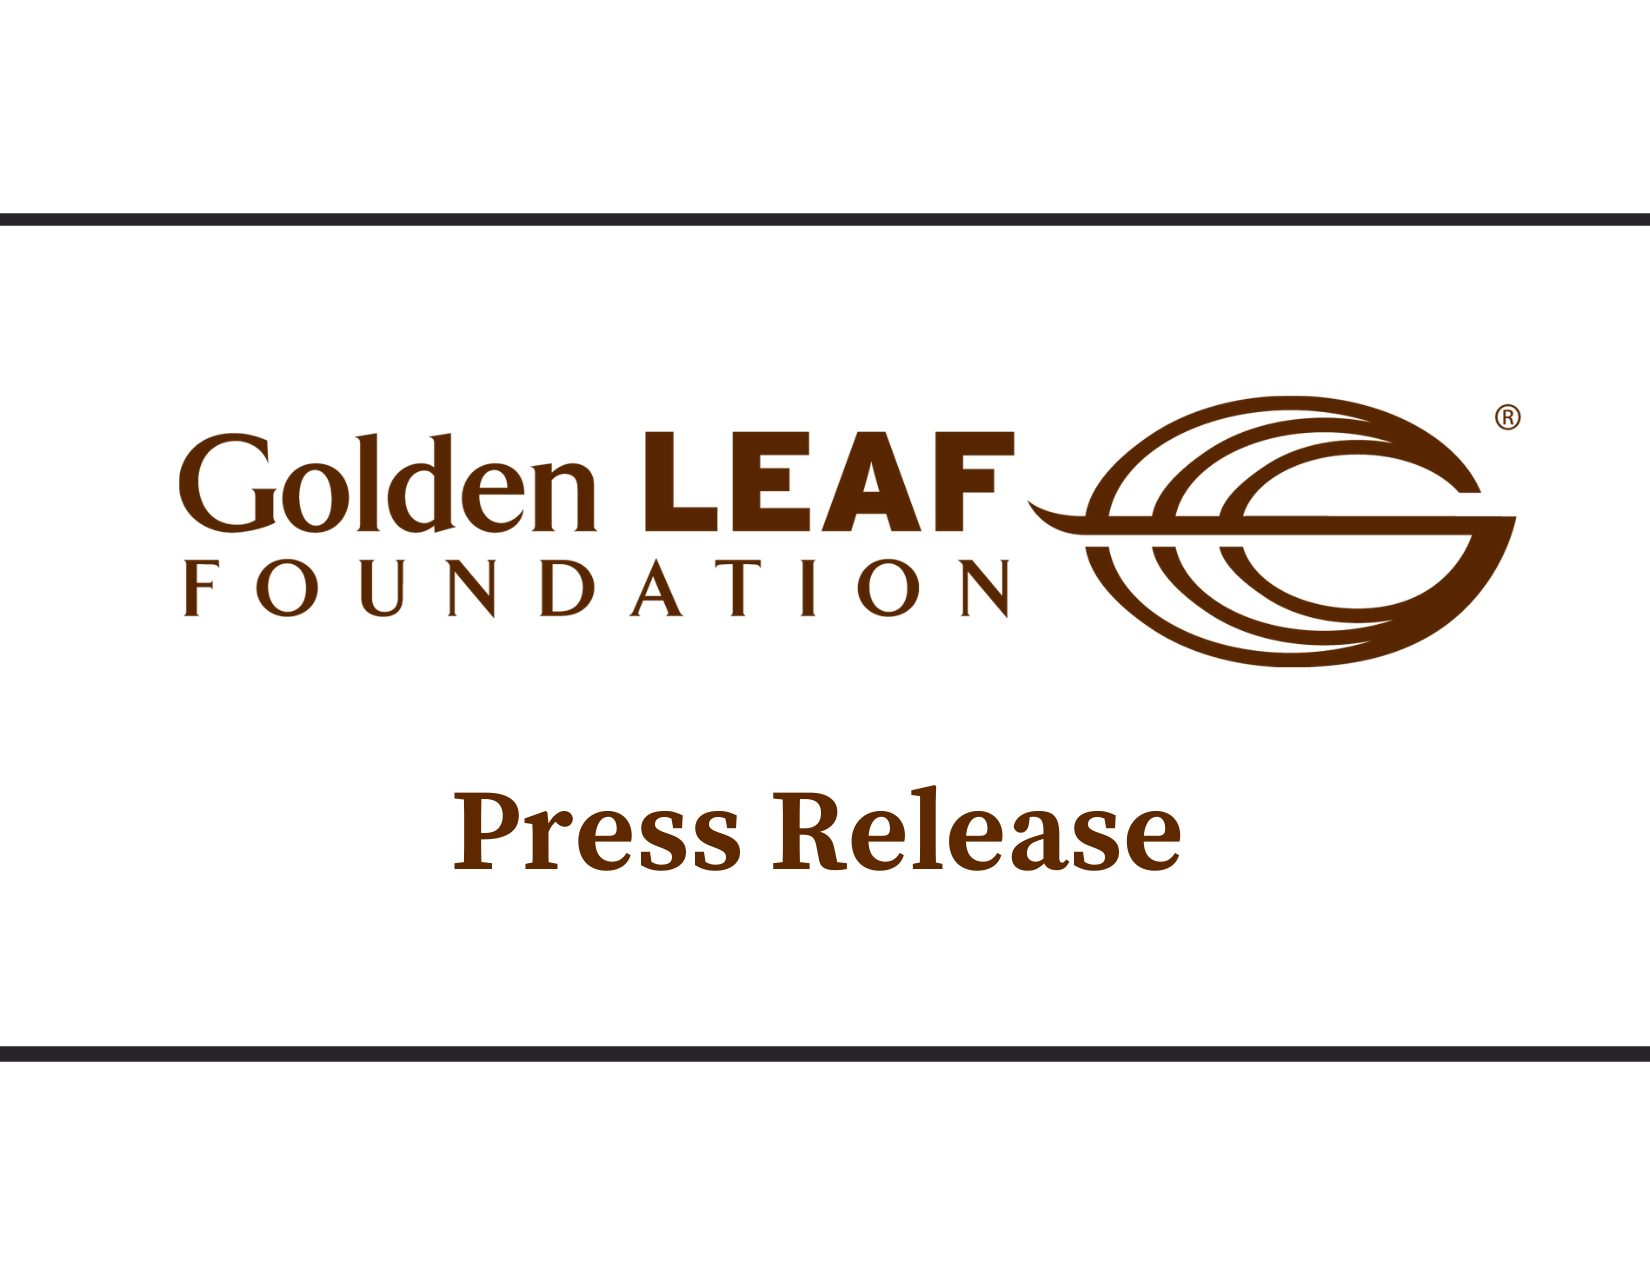 Golden LEAF announces $5.5 million in awards for job creation, leadership development, new services for farmers, and welcomes new Board member